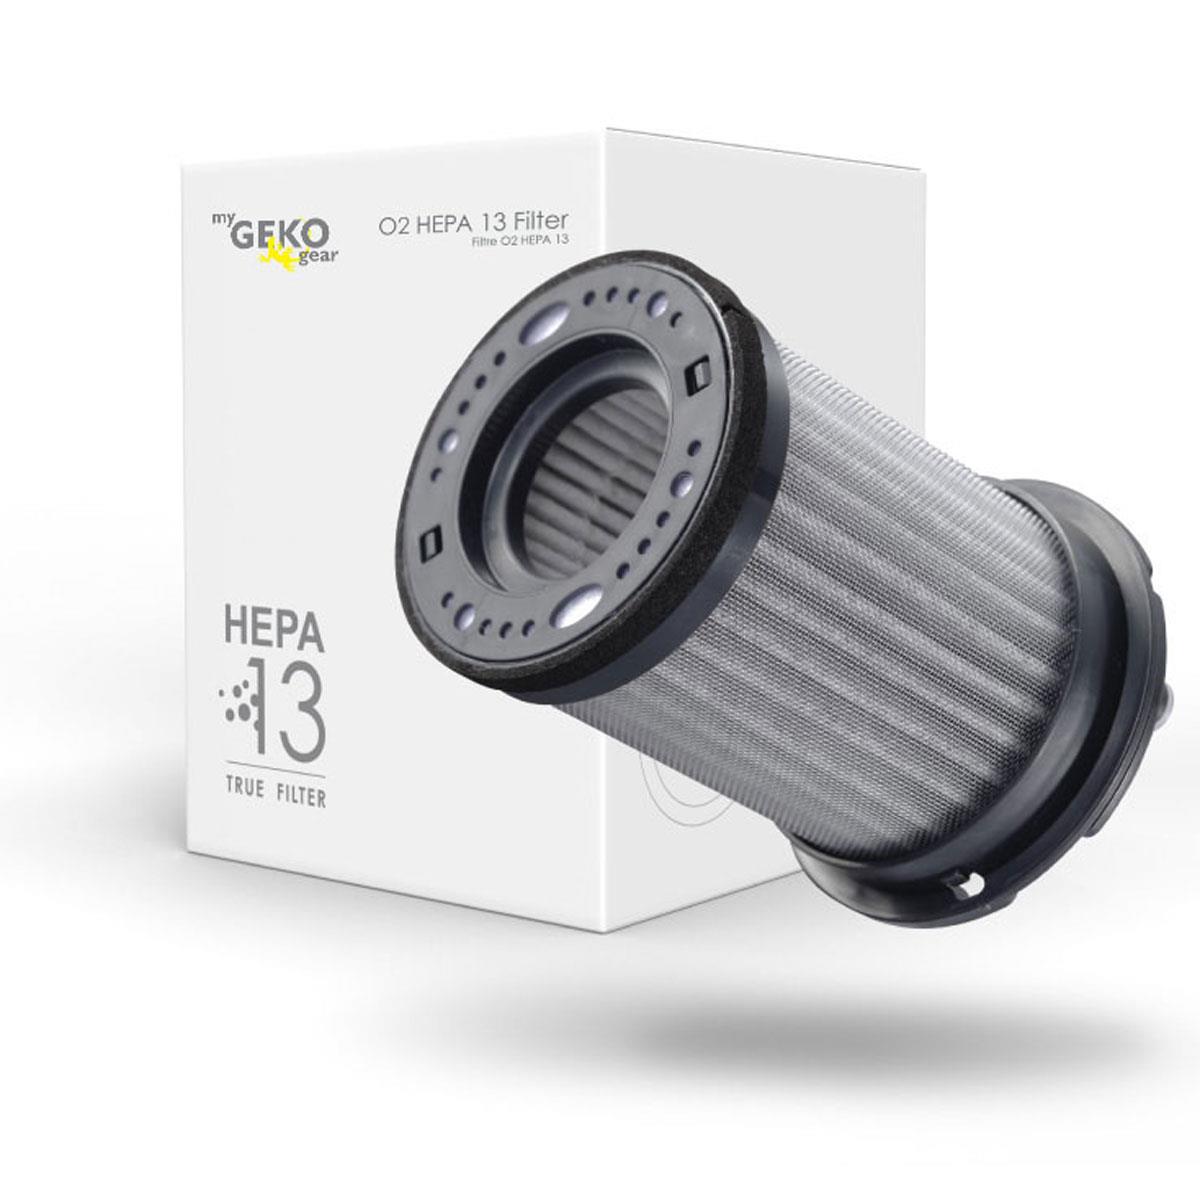 

myGEKOgear HEPA 13 Activated Carbon Filter for Cyclone O2 Air Purfier